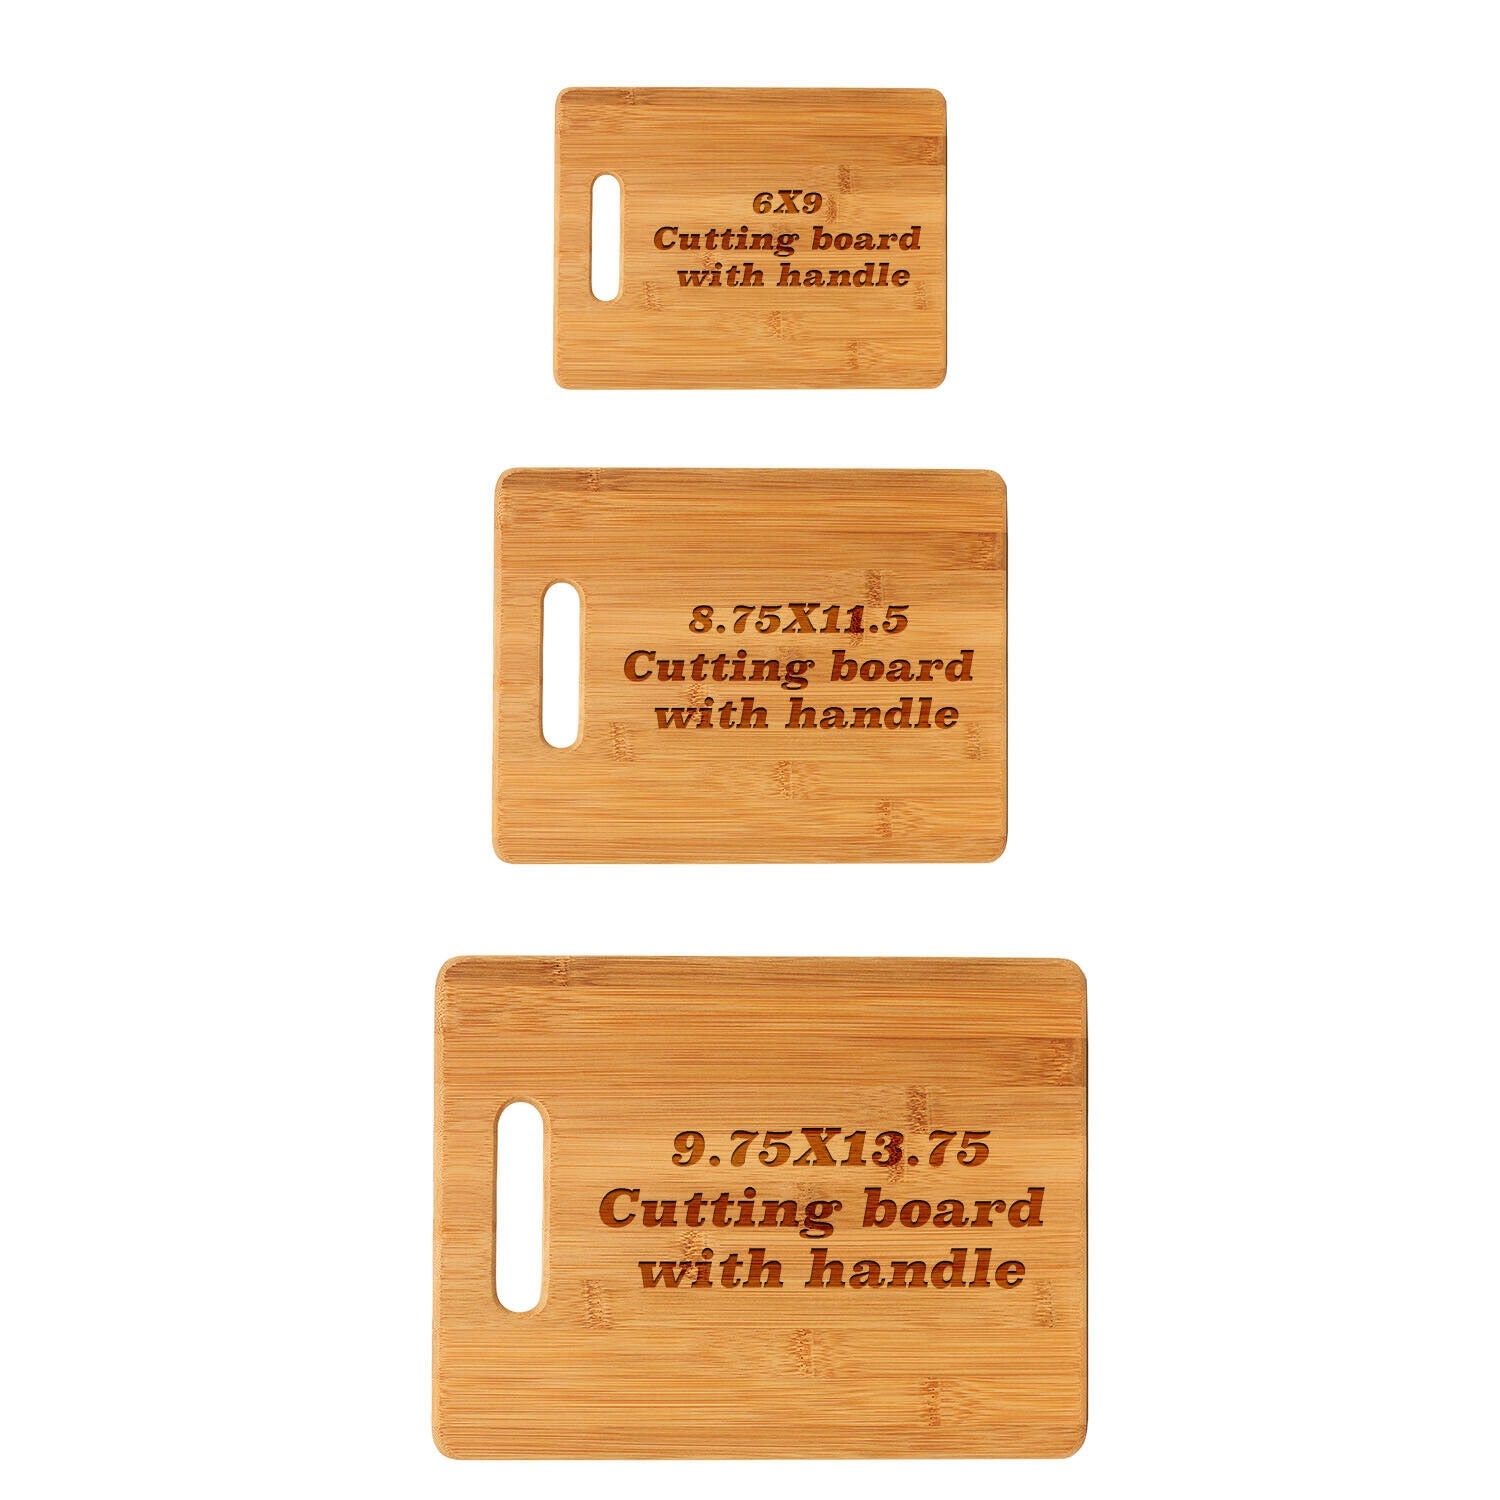 Gift Set: Mom Knows Best Engraved Cutting Board & Coffee Mug – Happily Ever  Etched